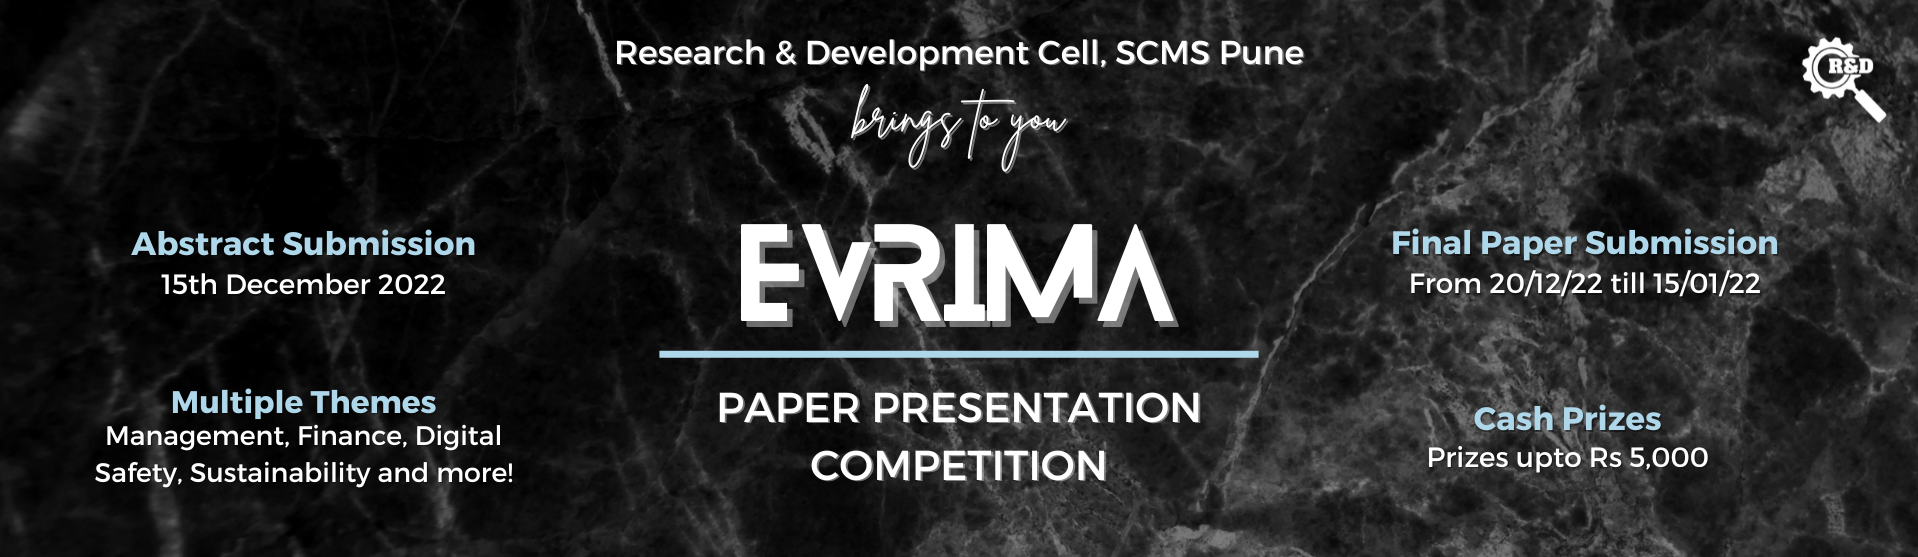 research paper presentation competition